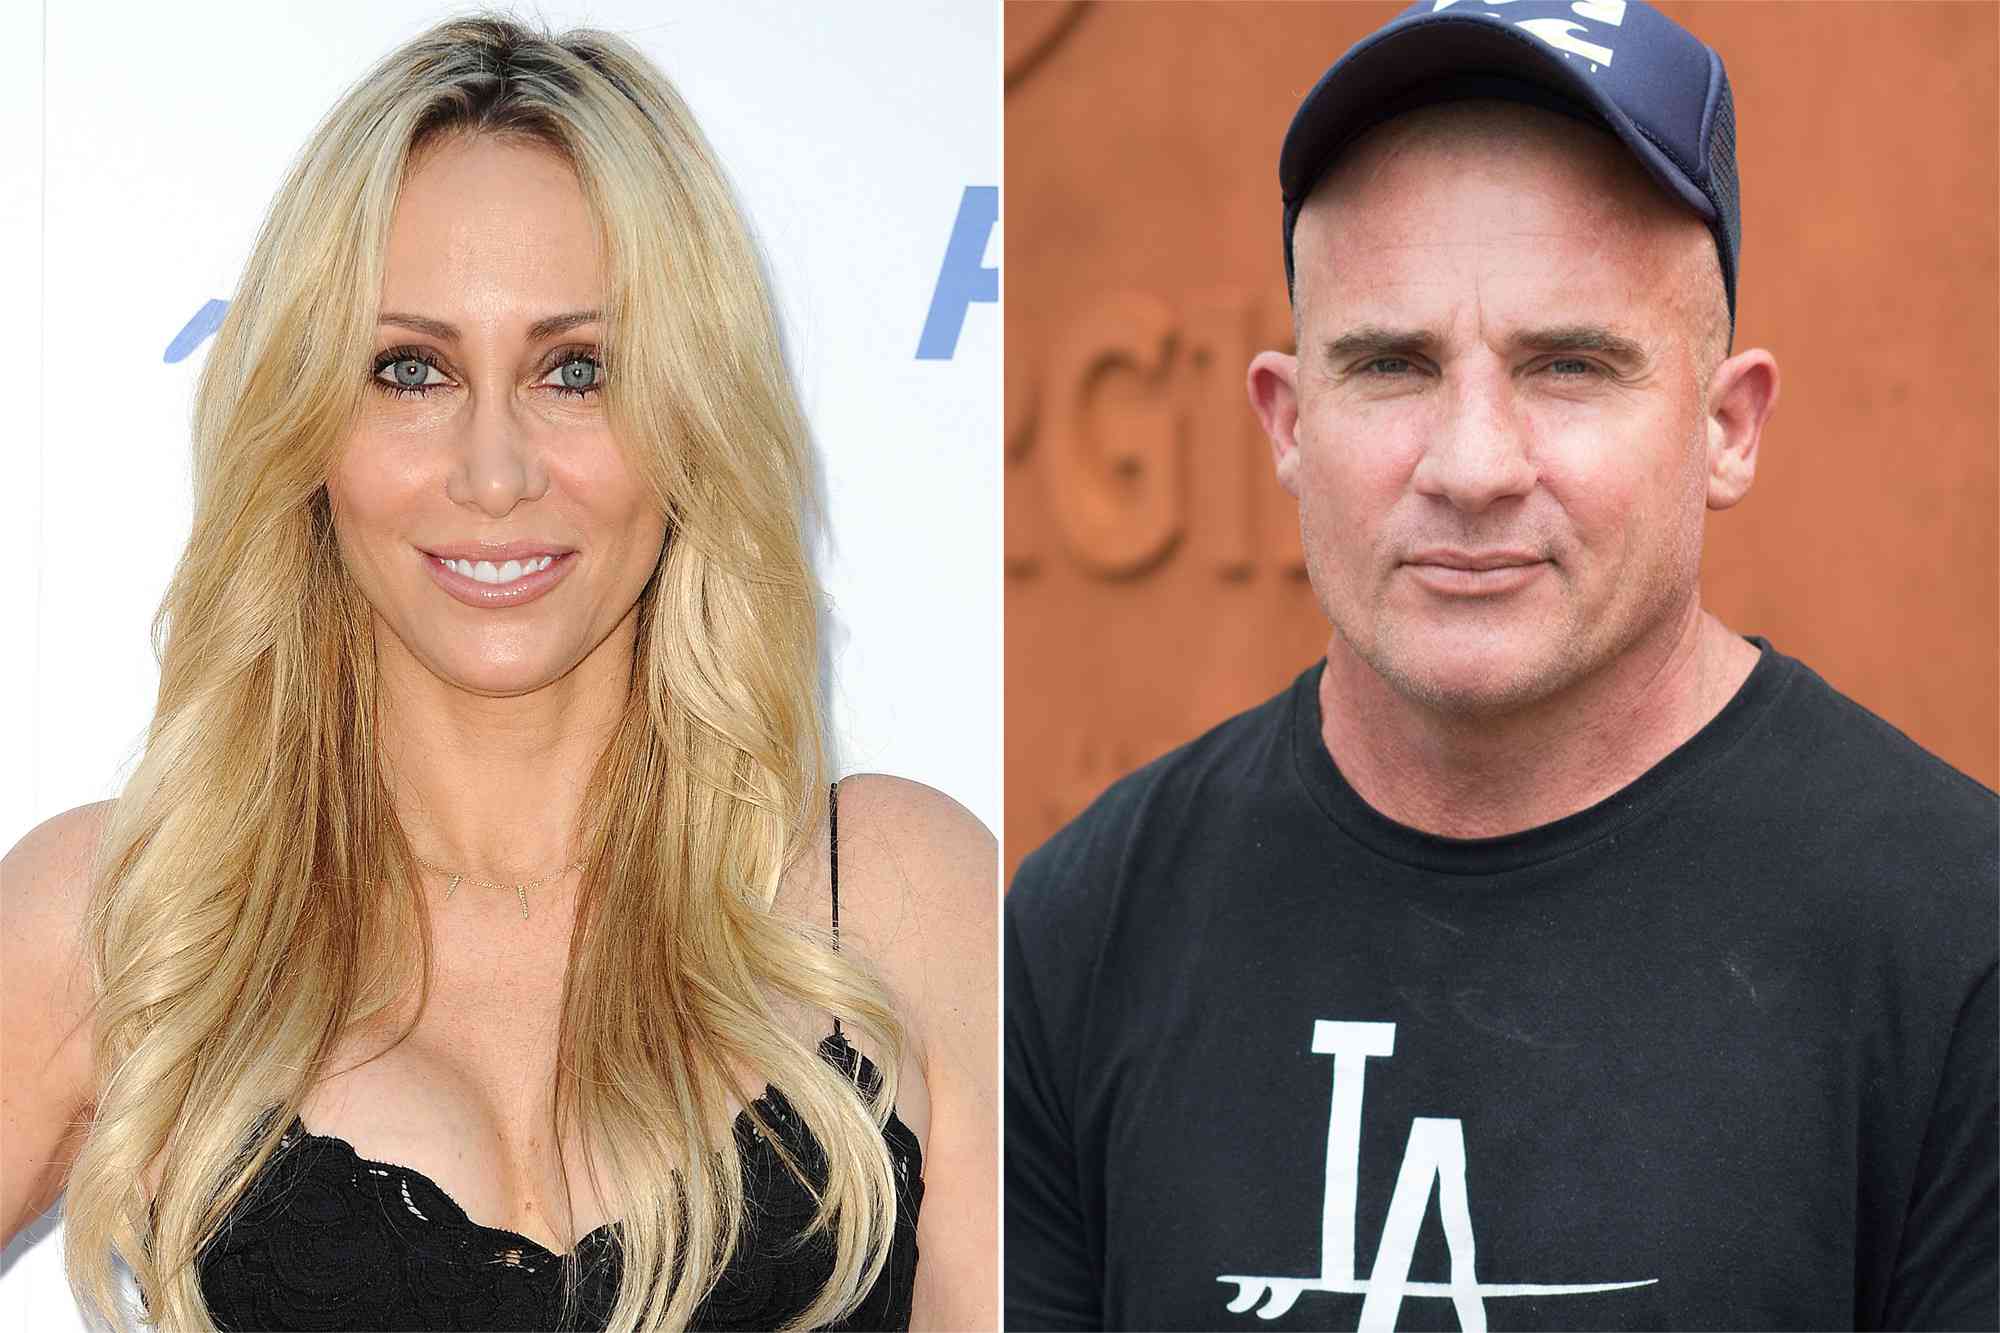 Tish Cyrus Says She Went to Therapy with Husband Dominic Purcell 'Two Weeks In' to Dating: 'It Was So Cool'